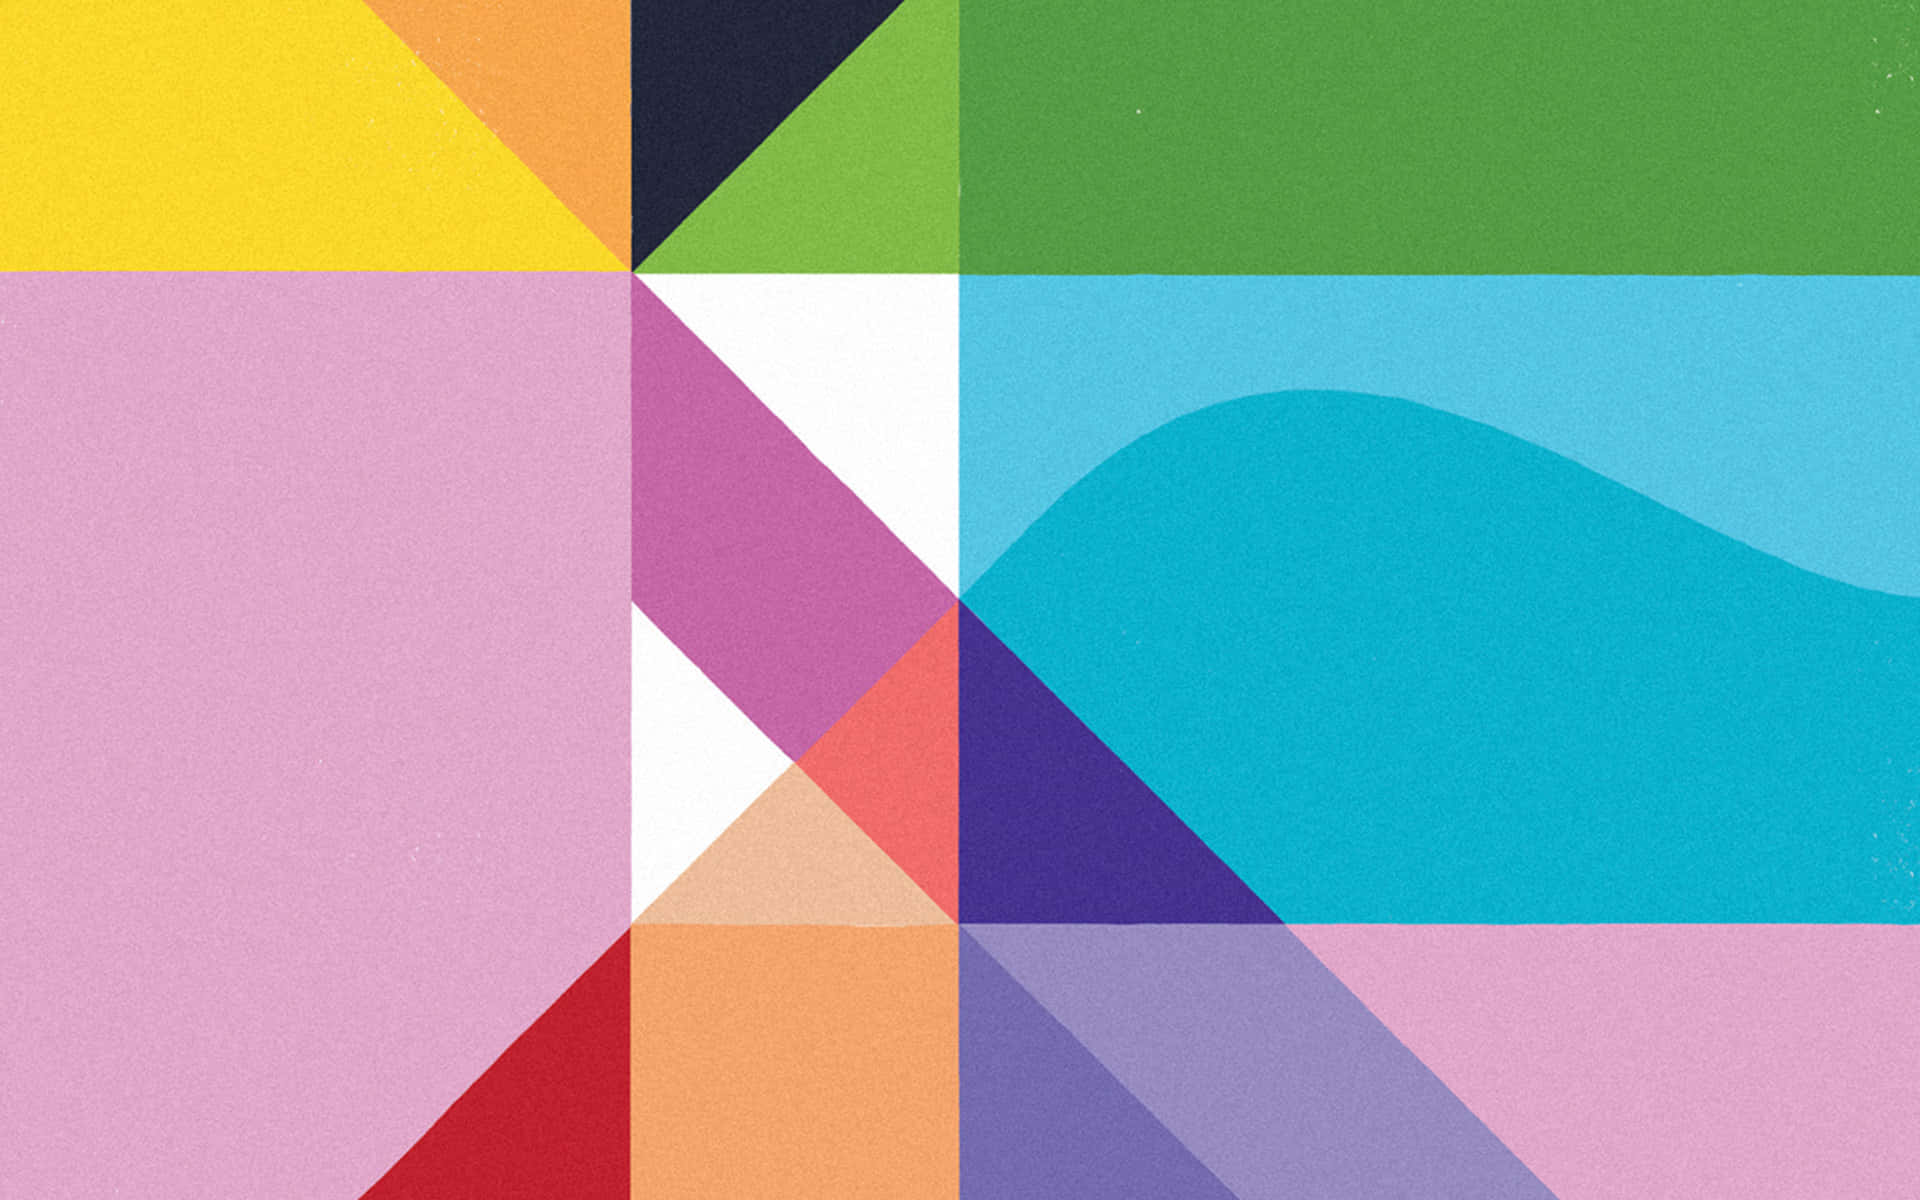 Enter a world of vibrant colors with this Color Block background